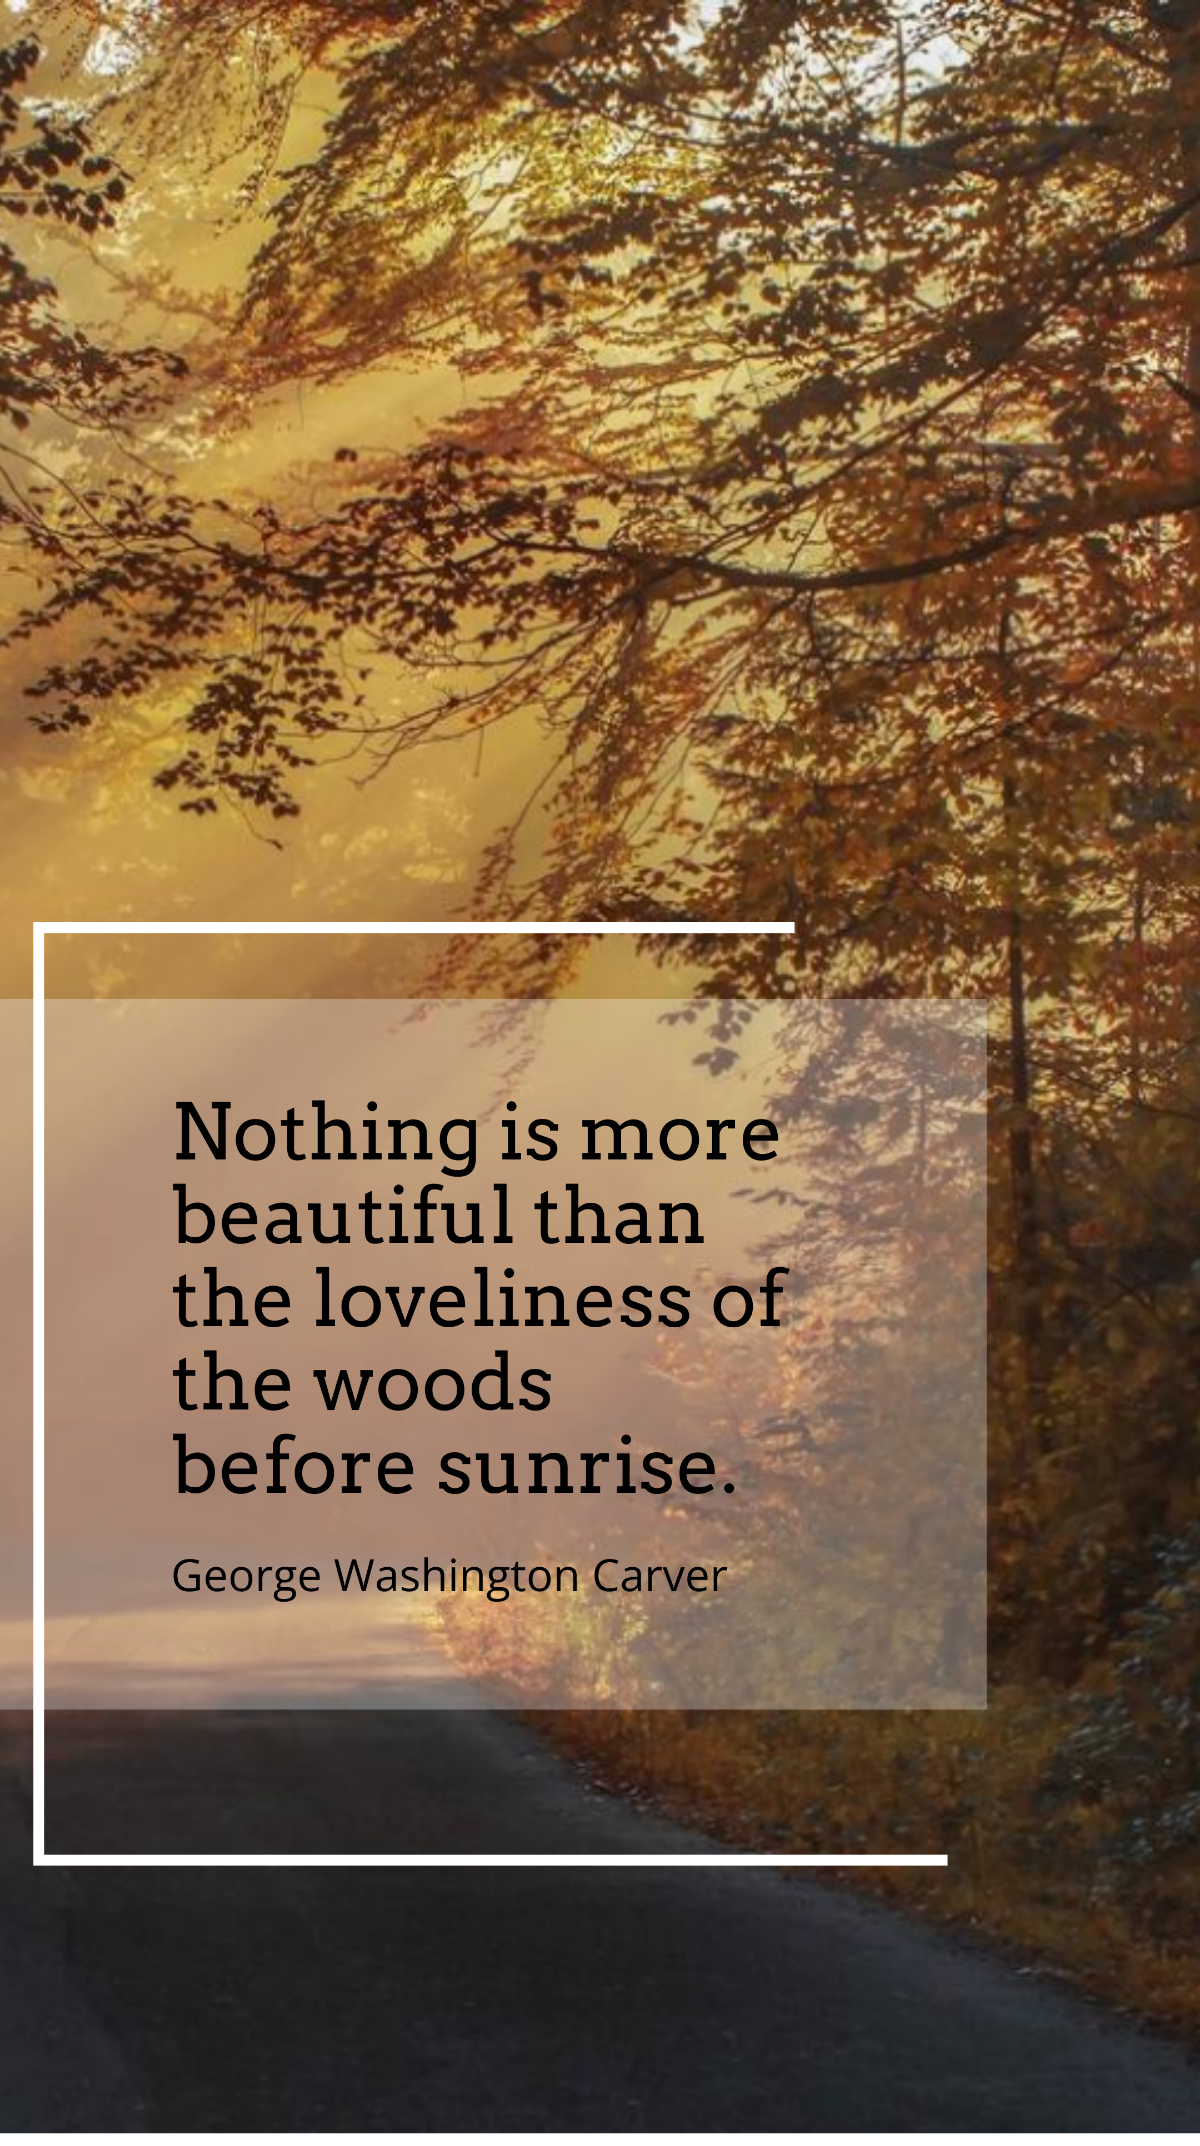 George Washington Carver - Nothing is more beautiful than the loveliness of the woods before sunrise. Template